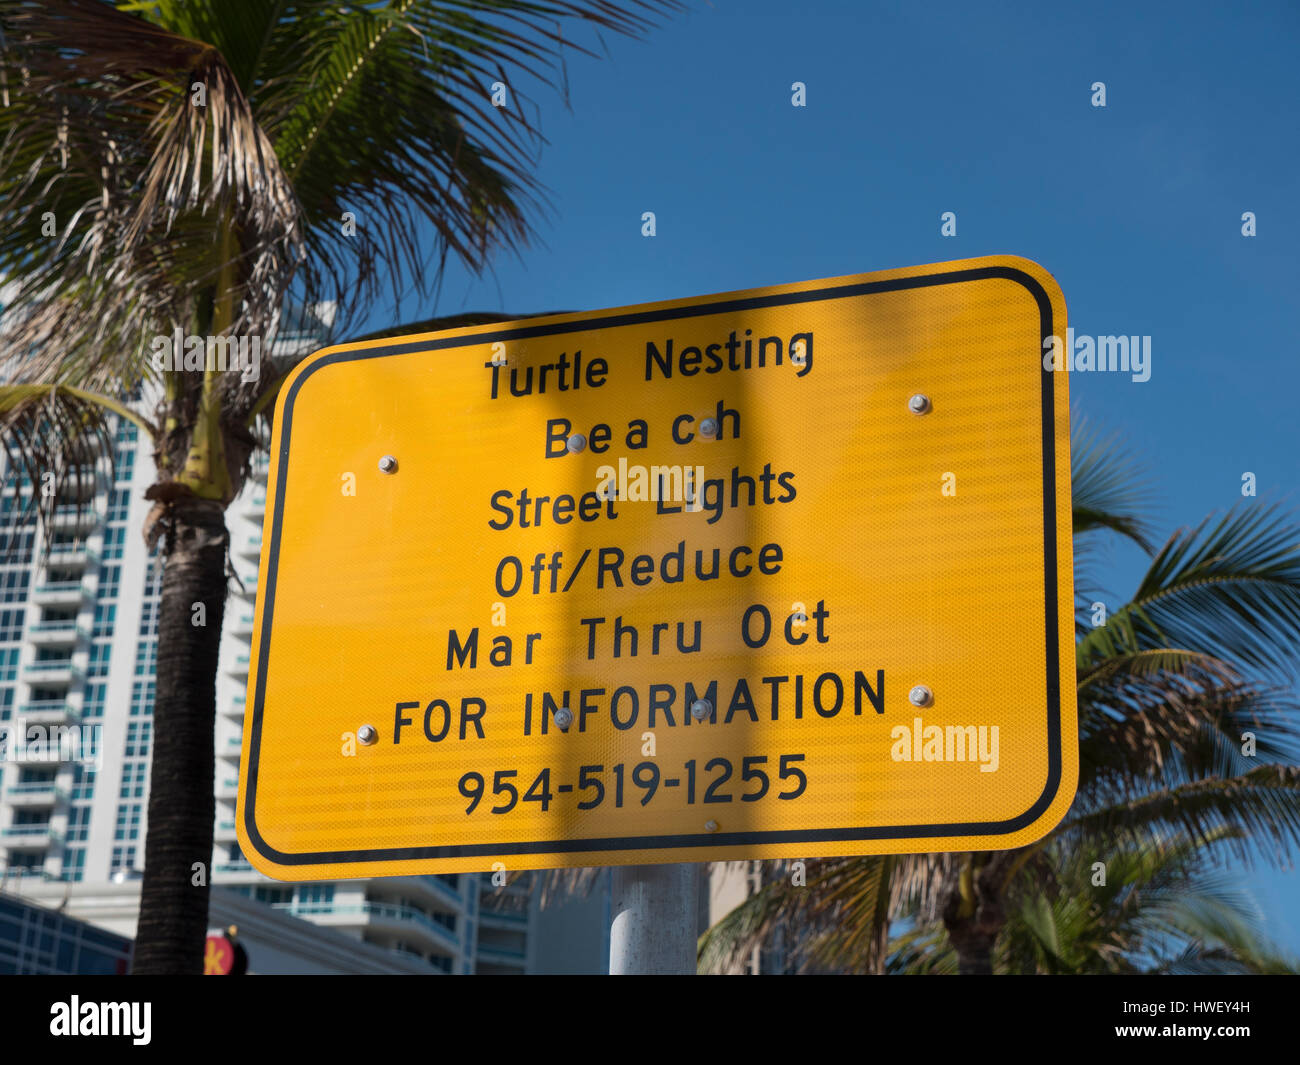 Street Sign At Fort Lauderdale Beach Near Las Olas, Warning Of Turtle Nesting On The Beach And Annual Light Restrictions March Through October Stock Photo